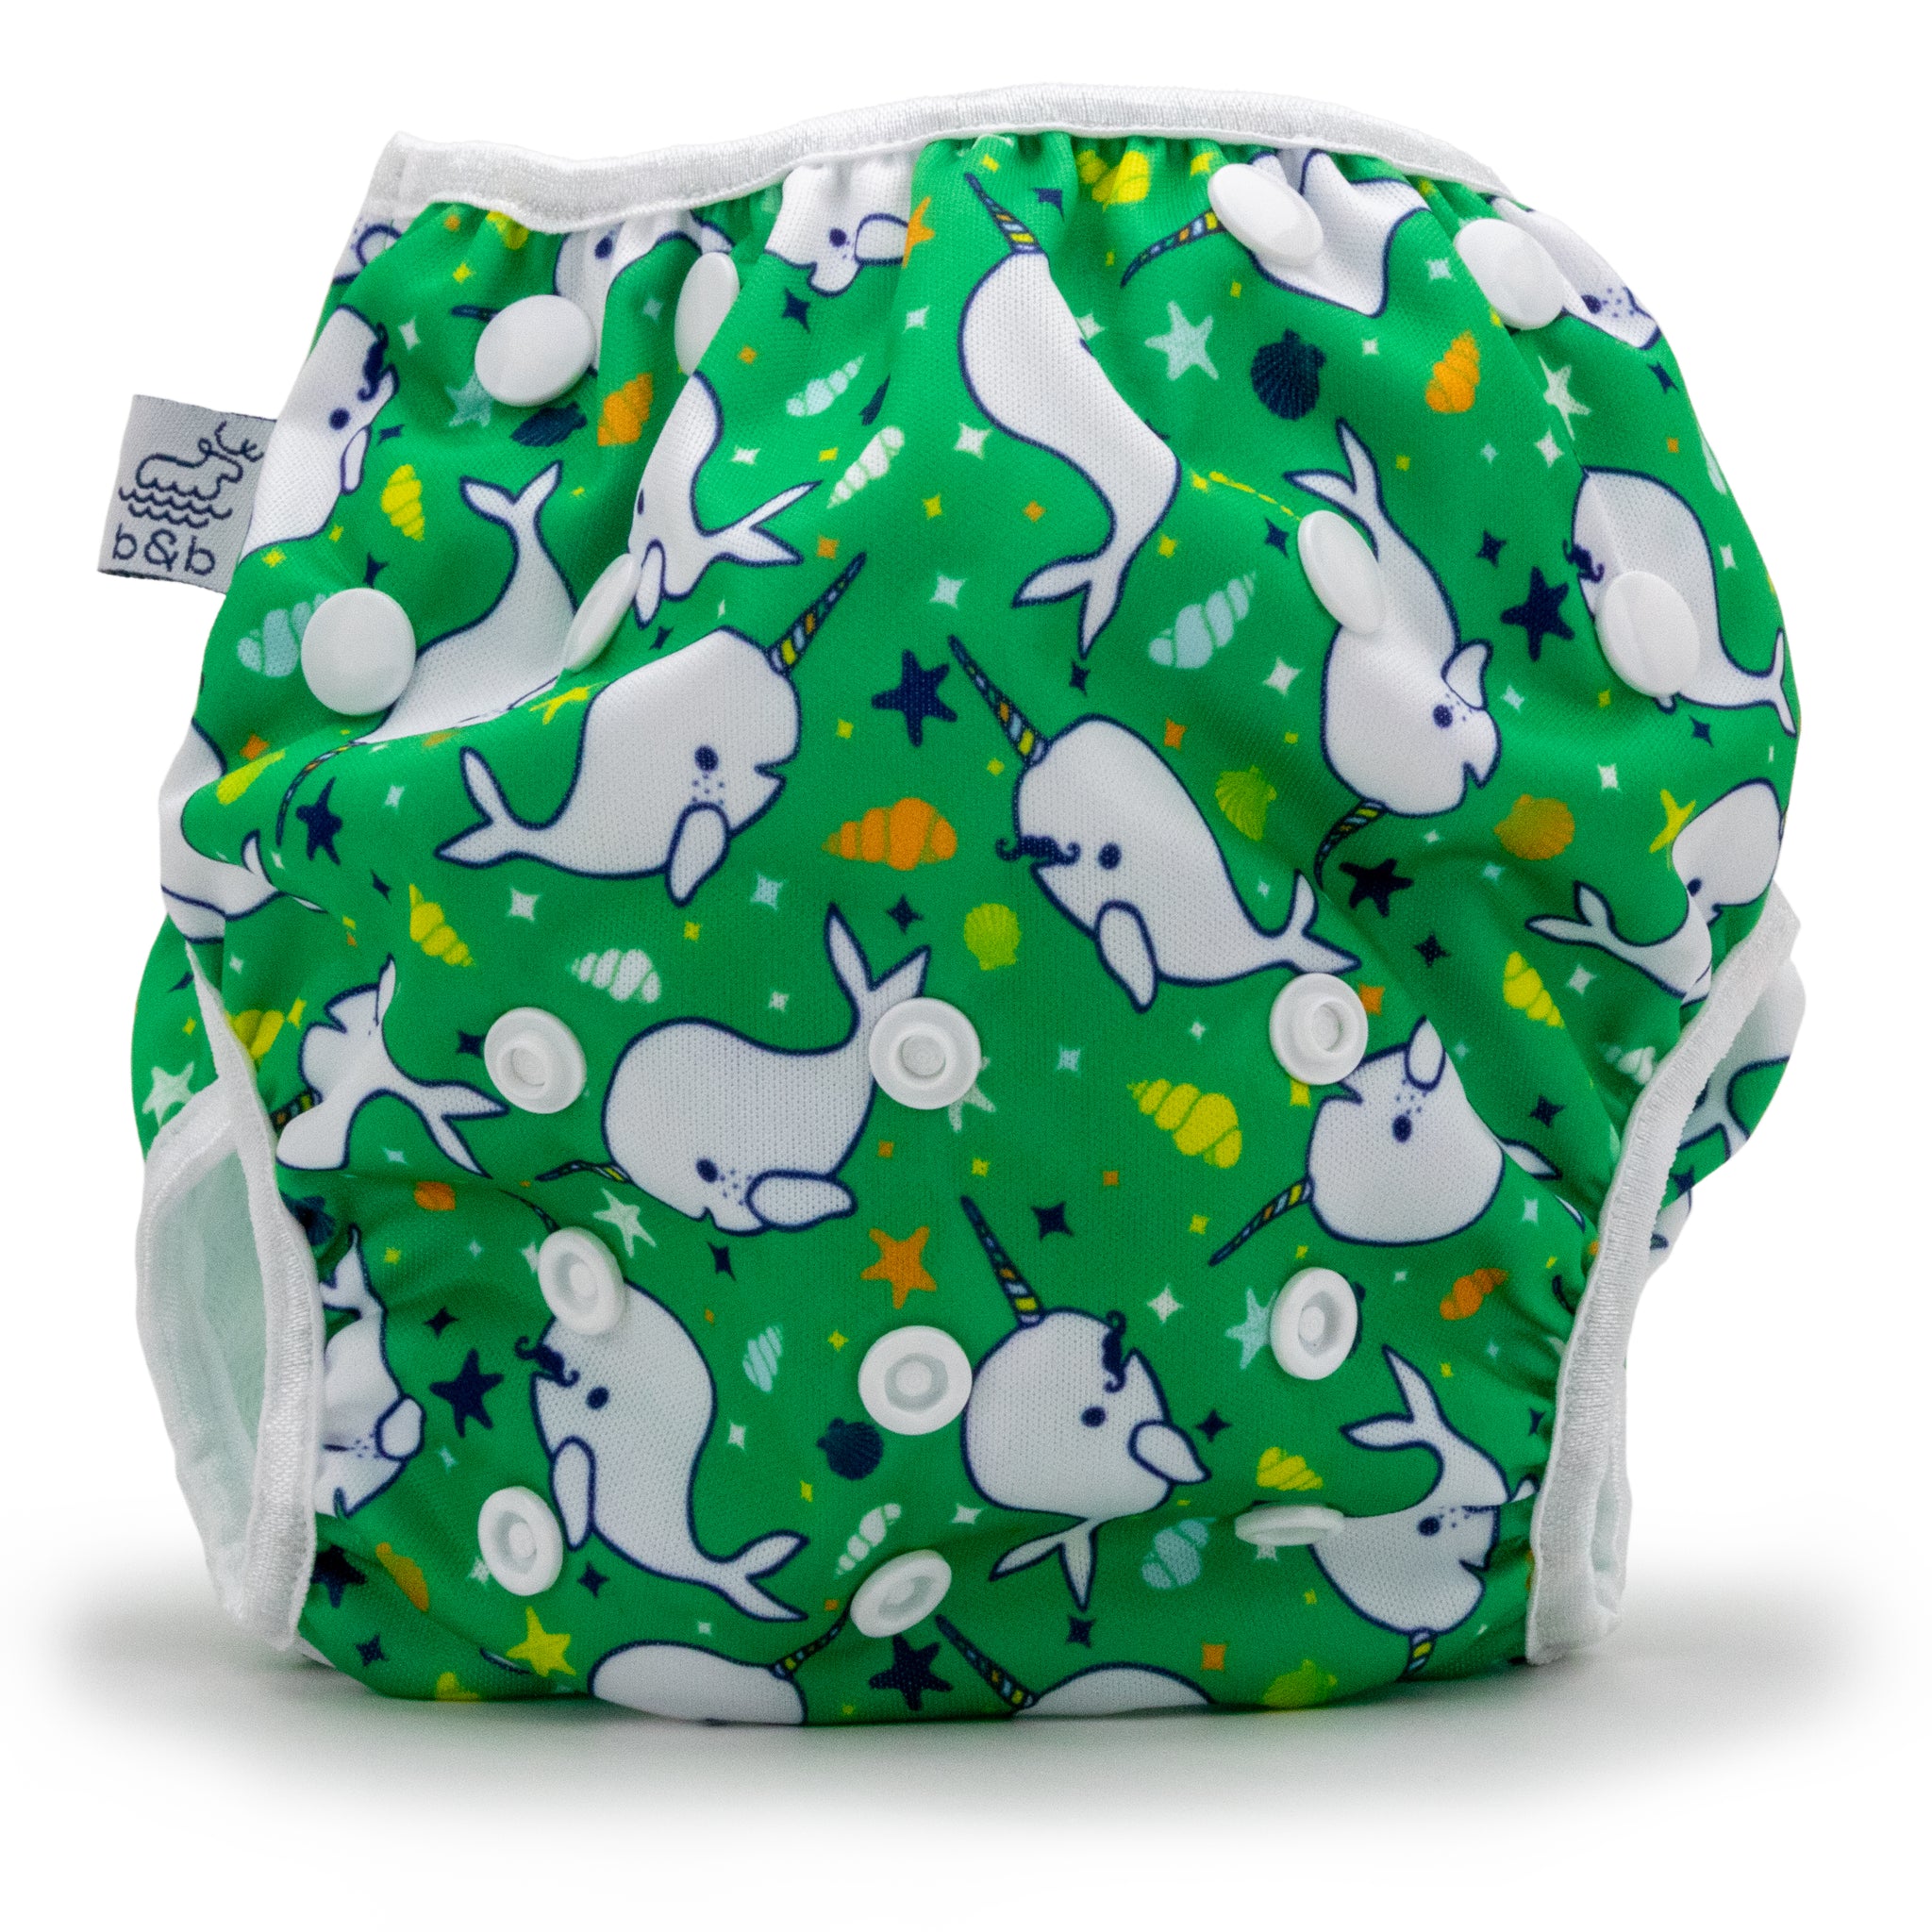 Narwahls Green Reusable Swim Diaper for Babies and Infants